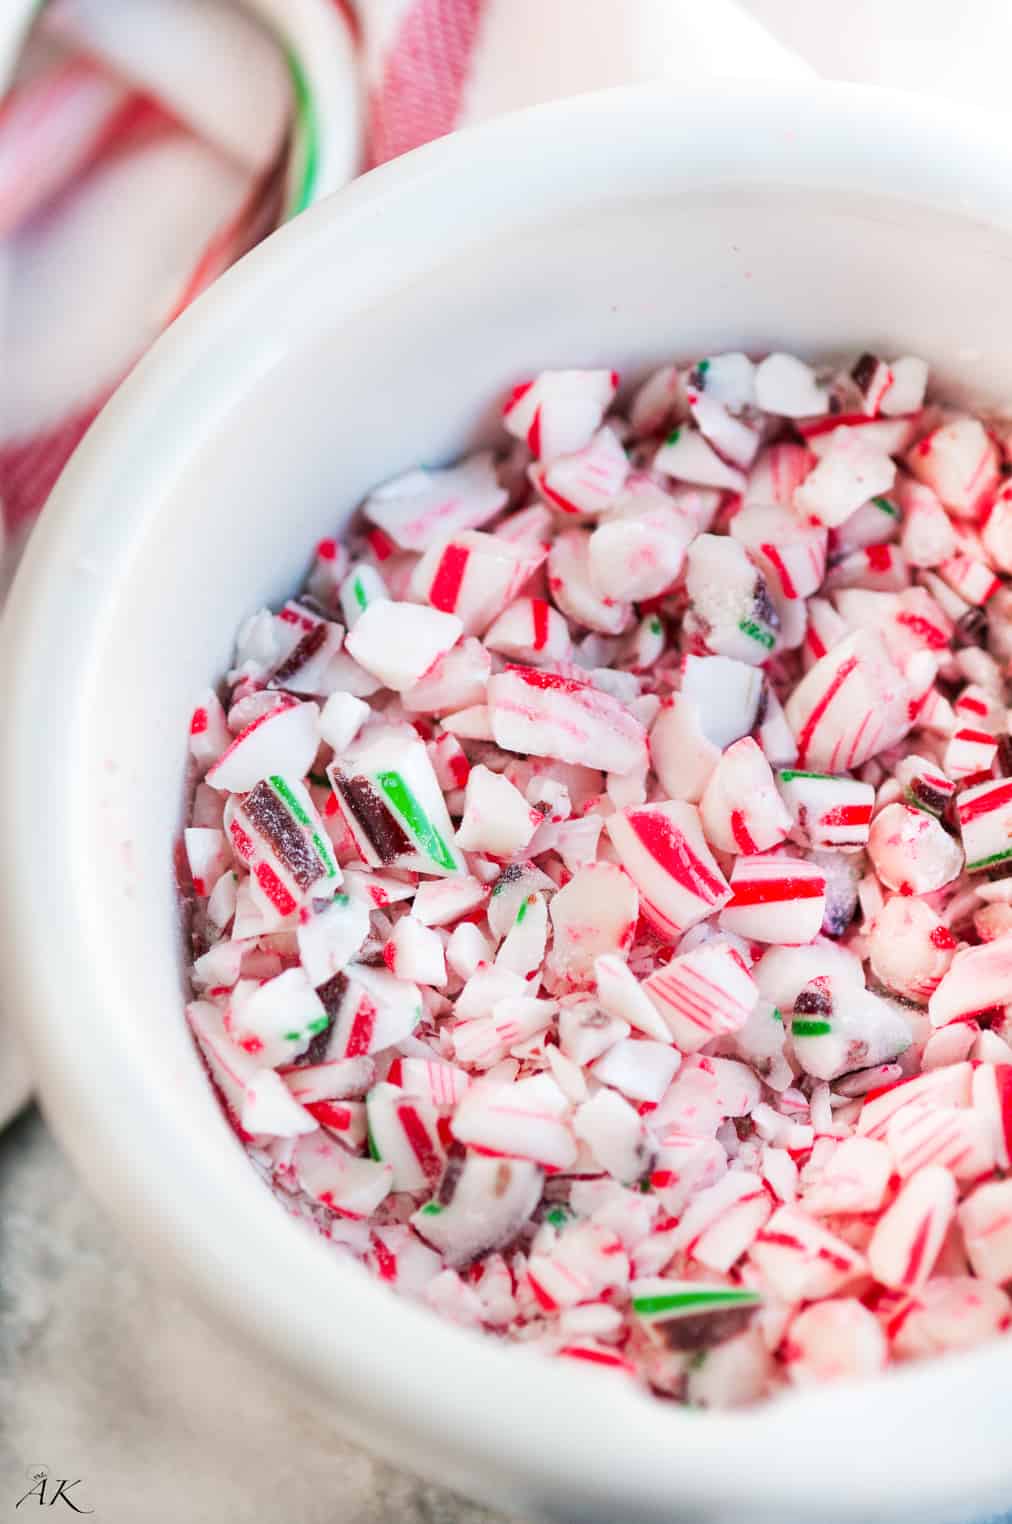 Crushed Peppermint and Chocolate Candy Canes